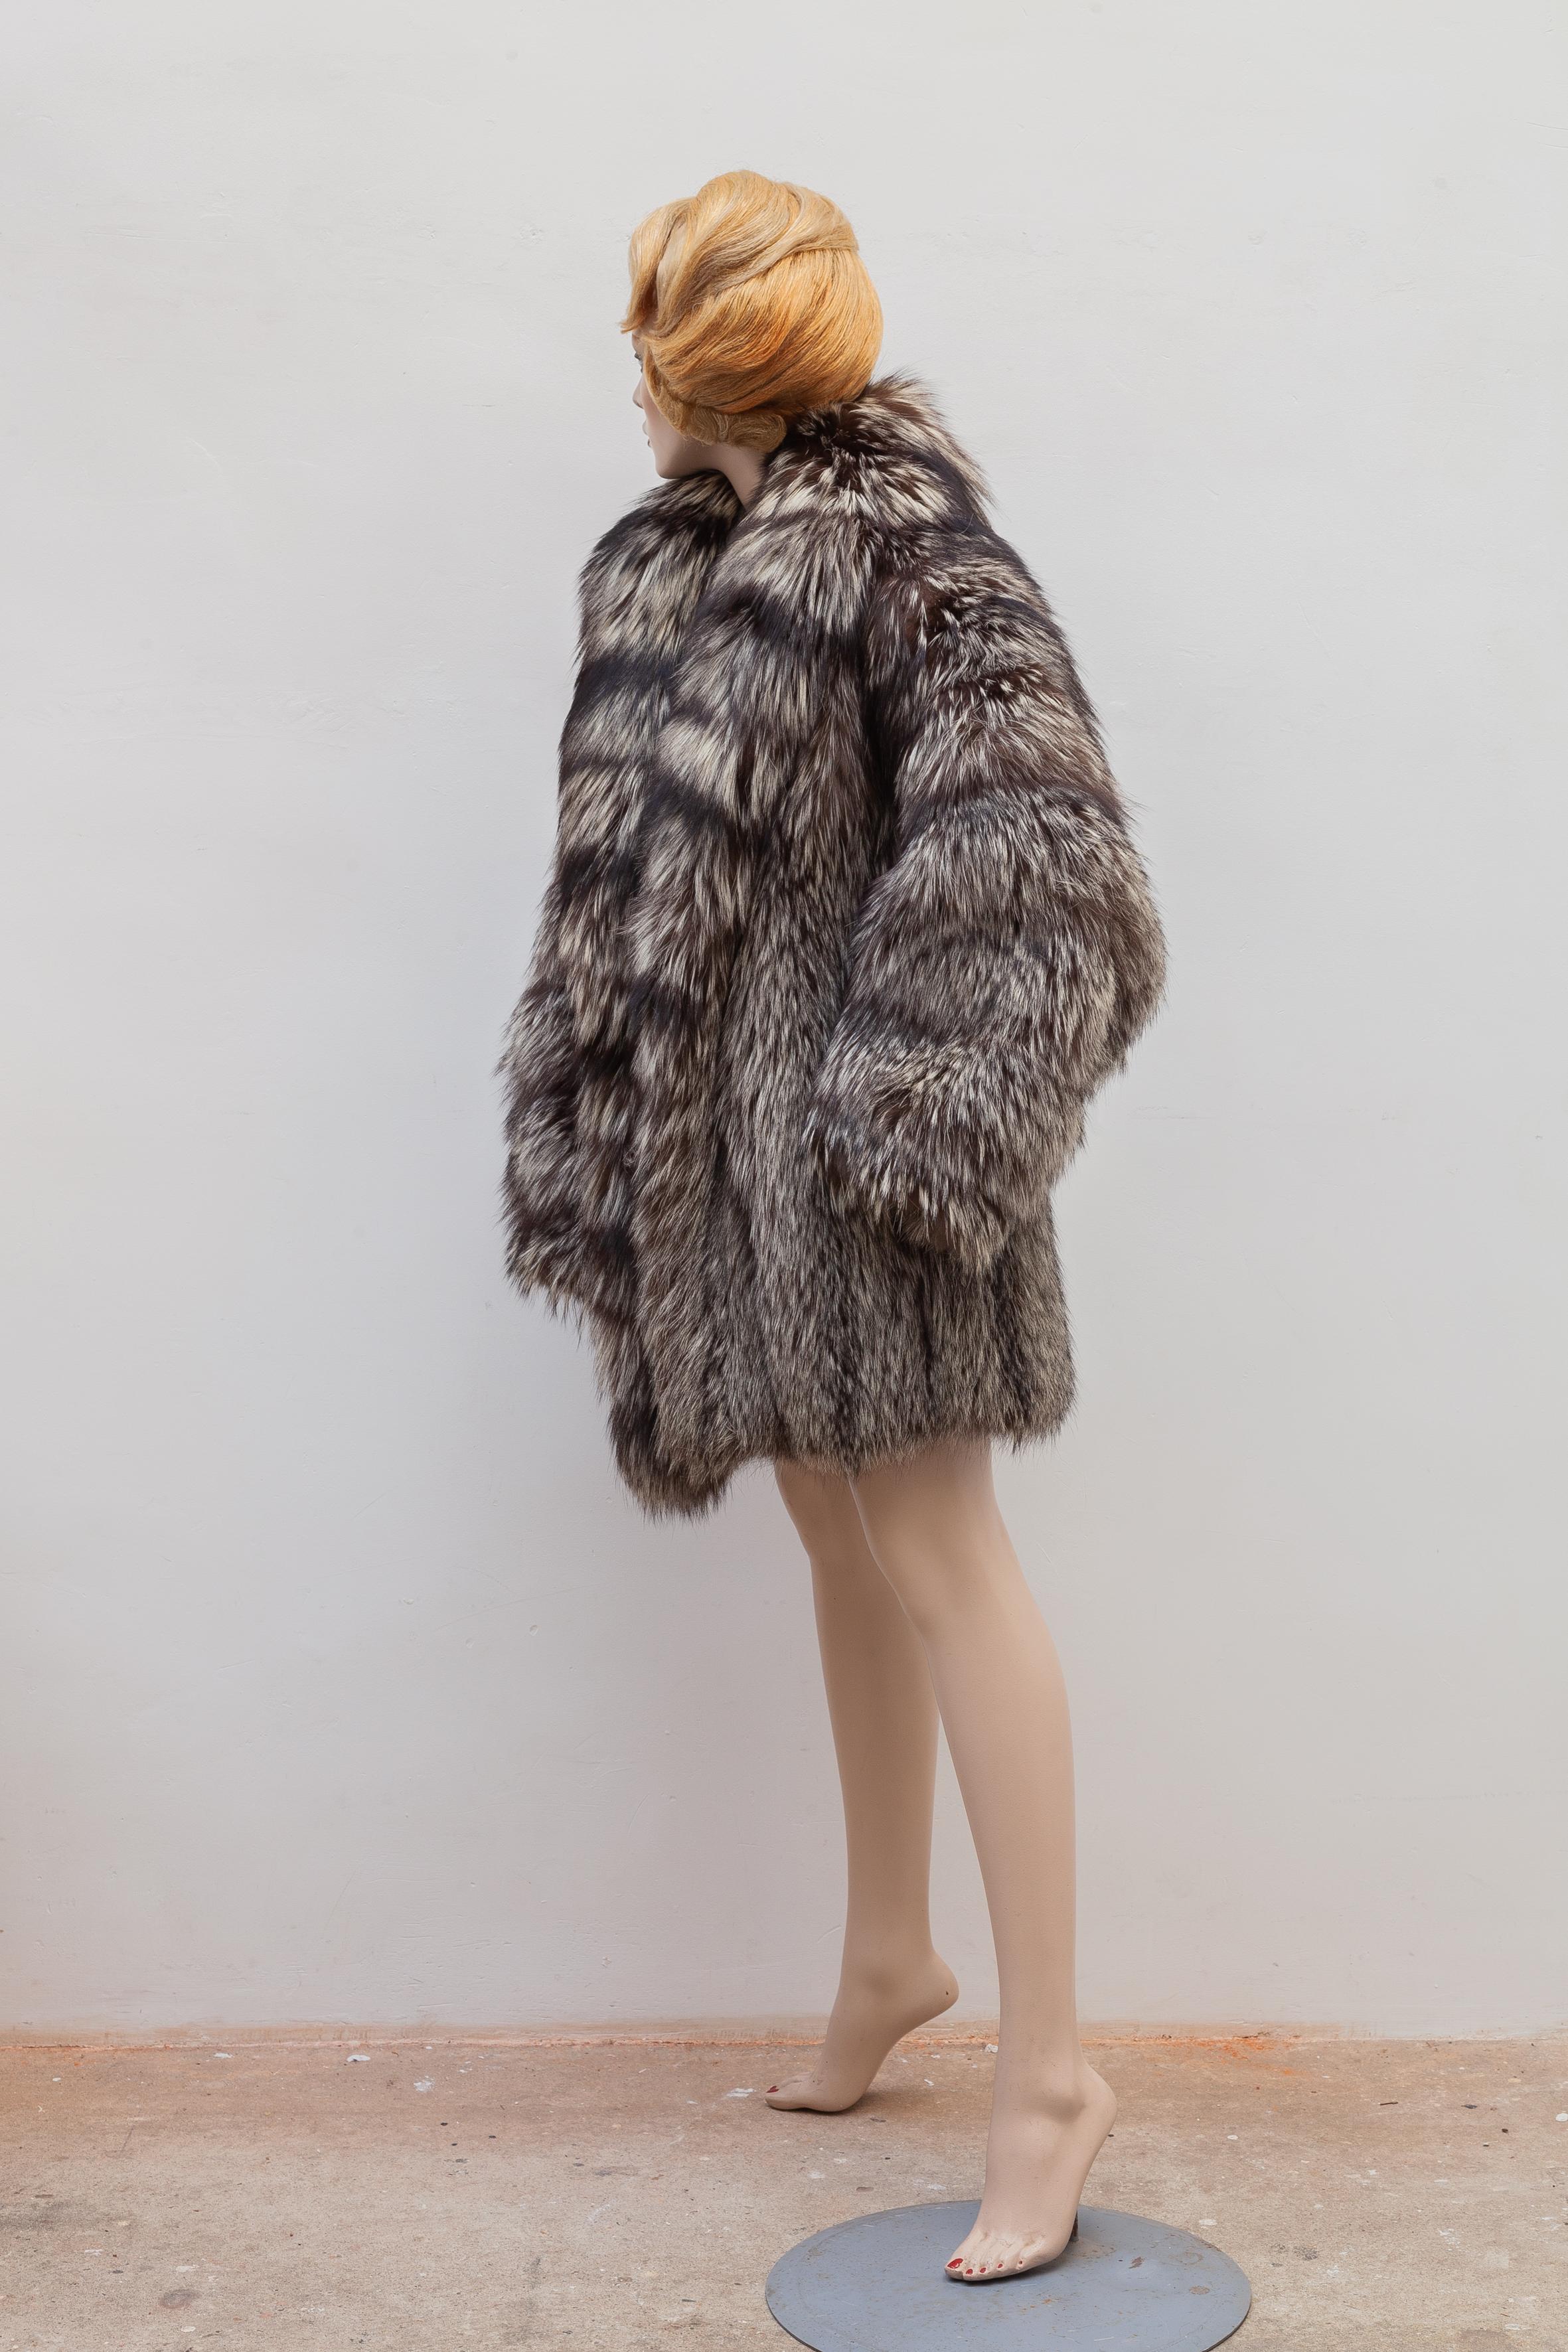 Vintage Fox fur coat by De Smedt, Antwerp. Roomy mid-length fit with shawl collar and bell sleeves. Side pockets. Black lining.
Shoulder to Shoulder: 64 cm
Armpit to Armpit: 66 cm
Back Length: 94 cm
Sleeve Length: 55 cm